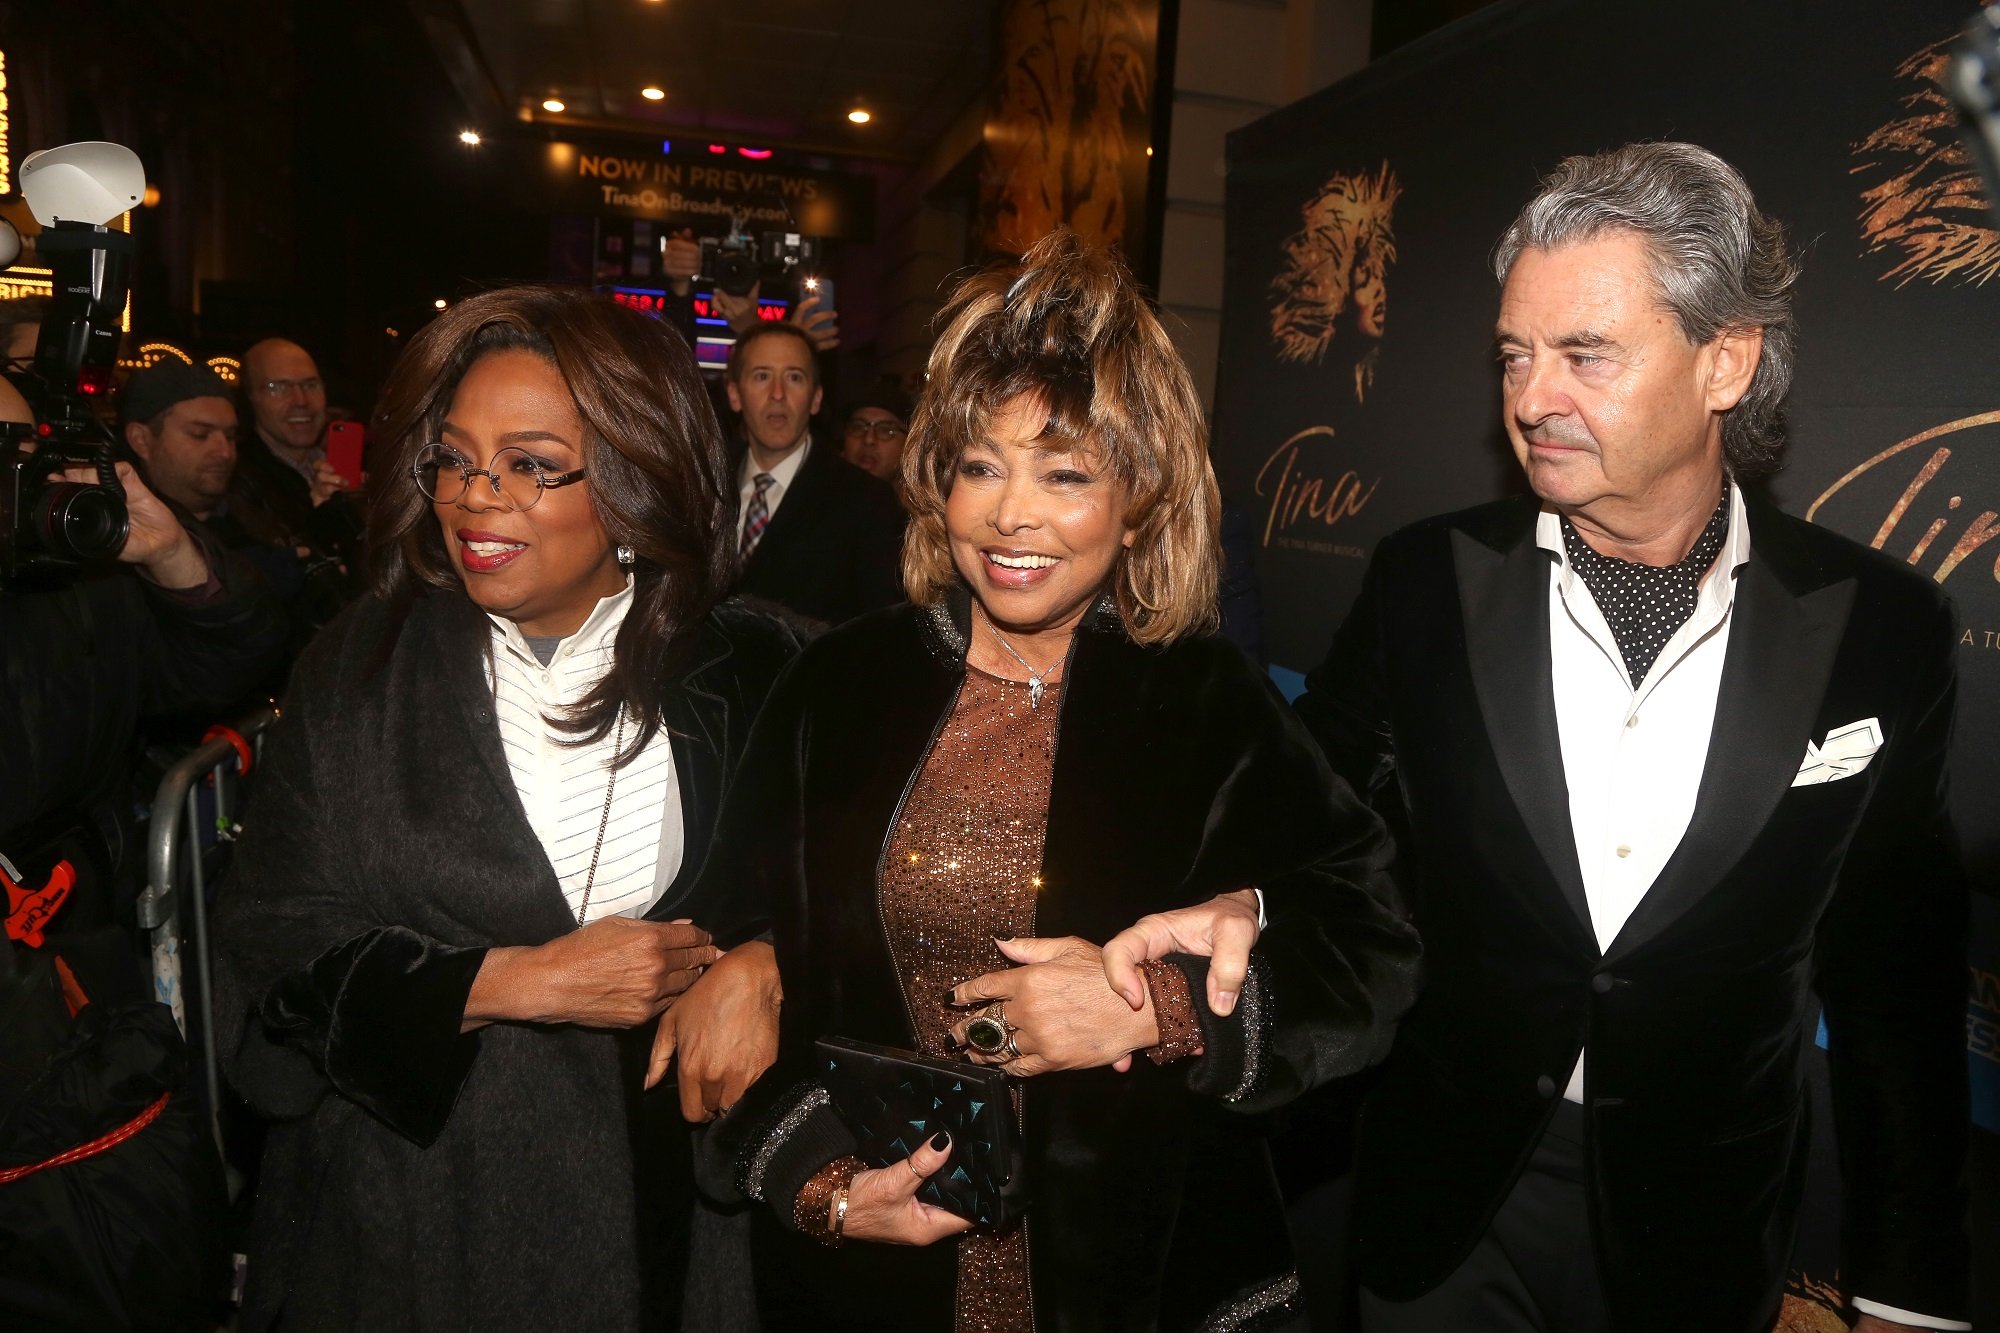 Tina Turner and Erwin Bach with Oprah Winfrey at the premiere of Tina the musical